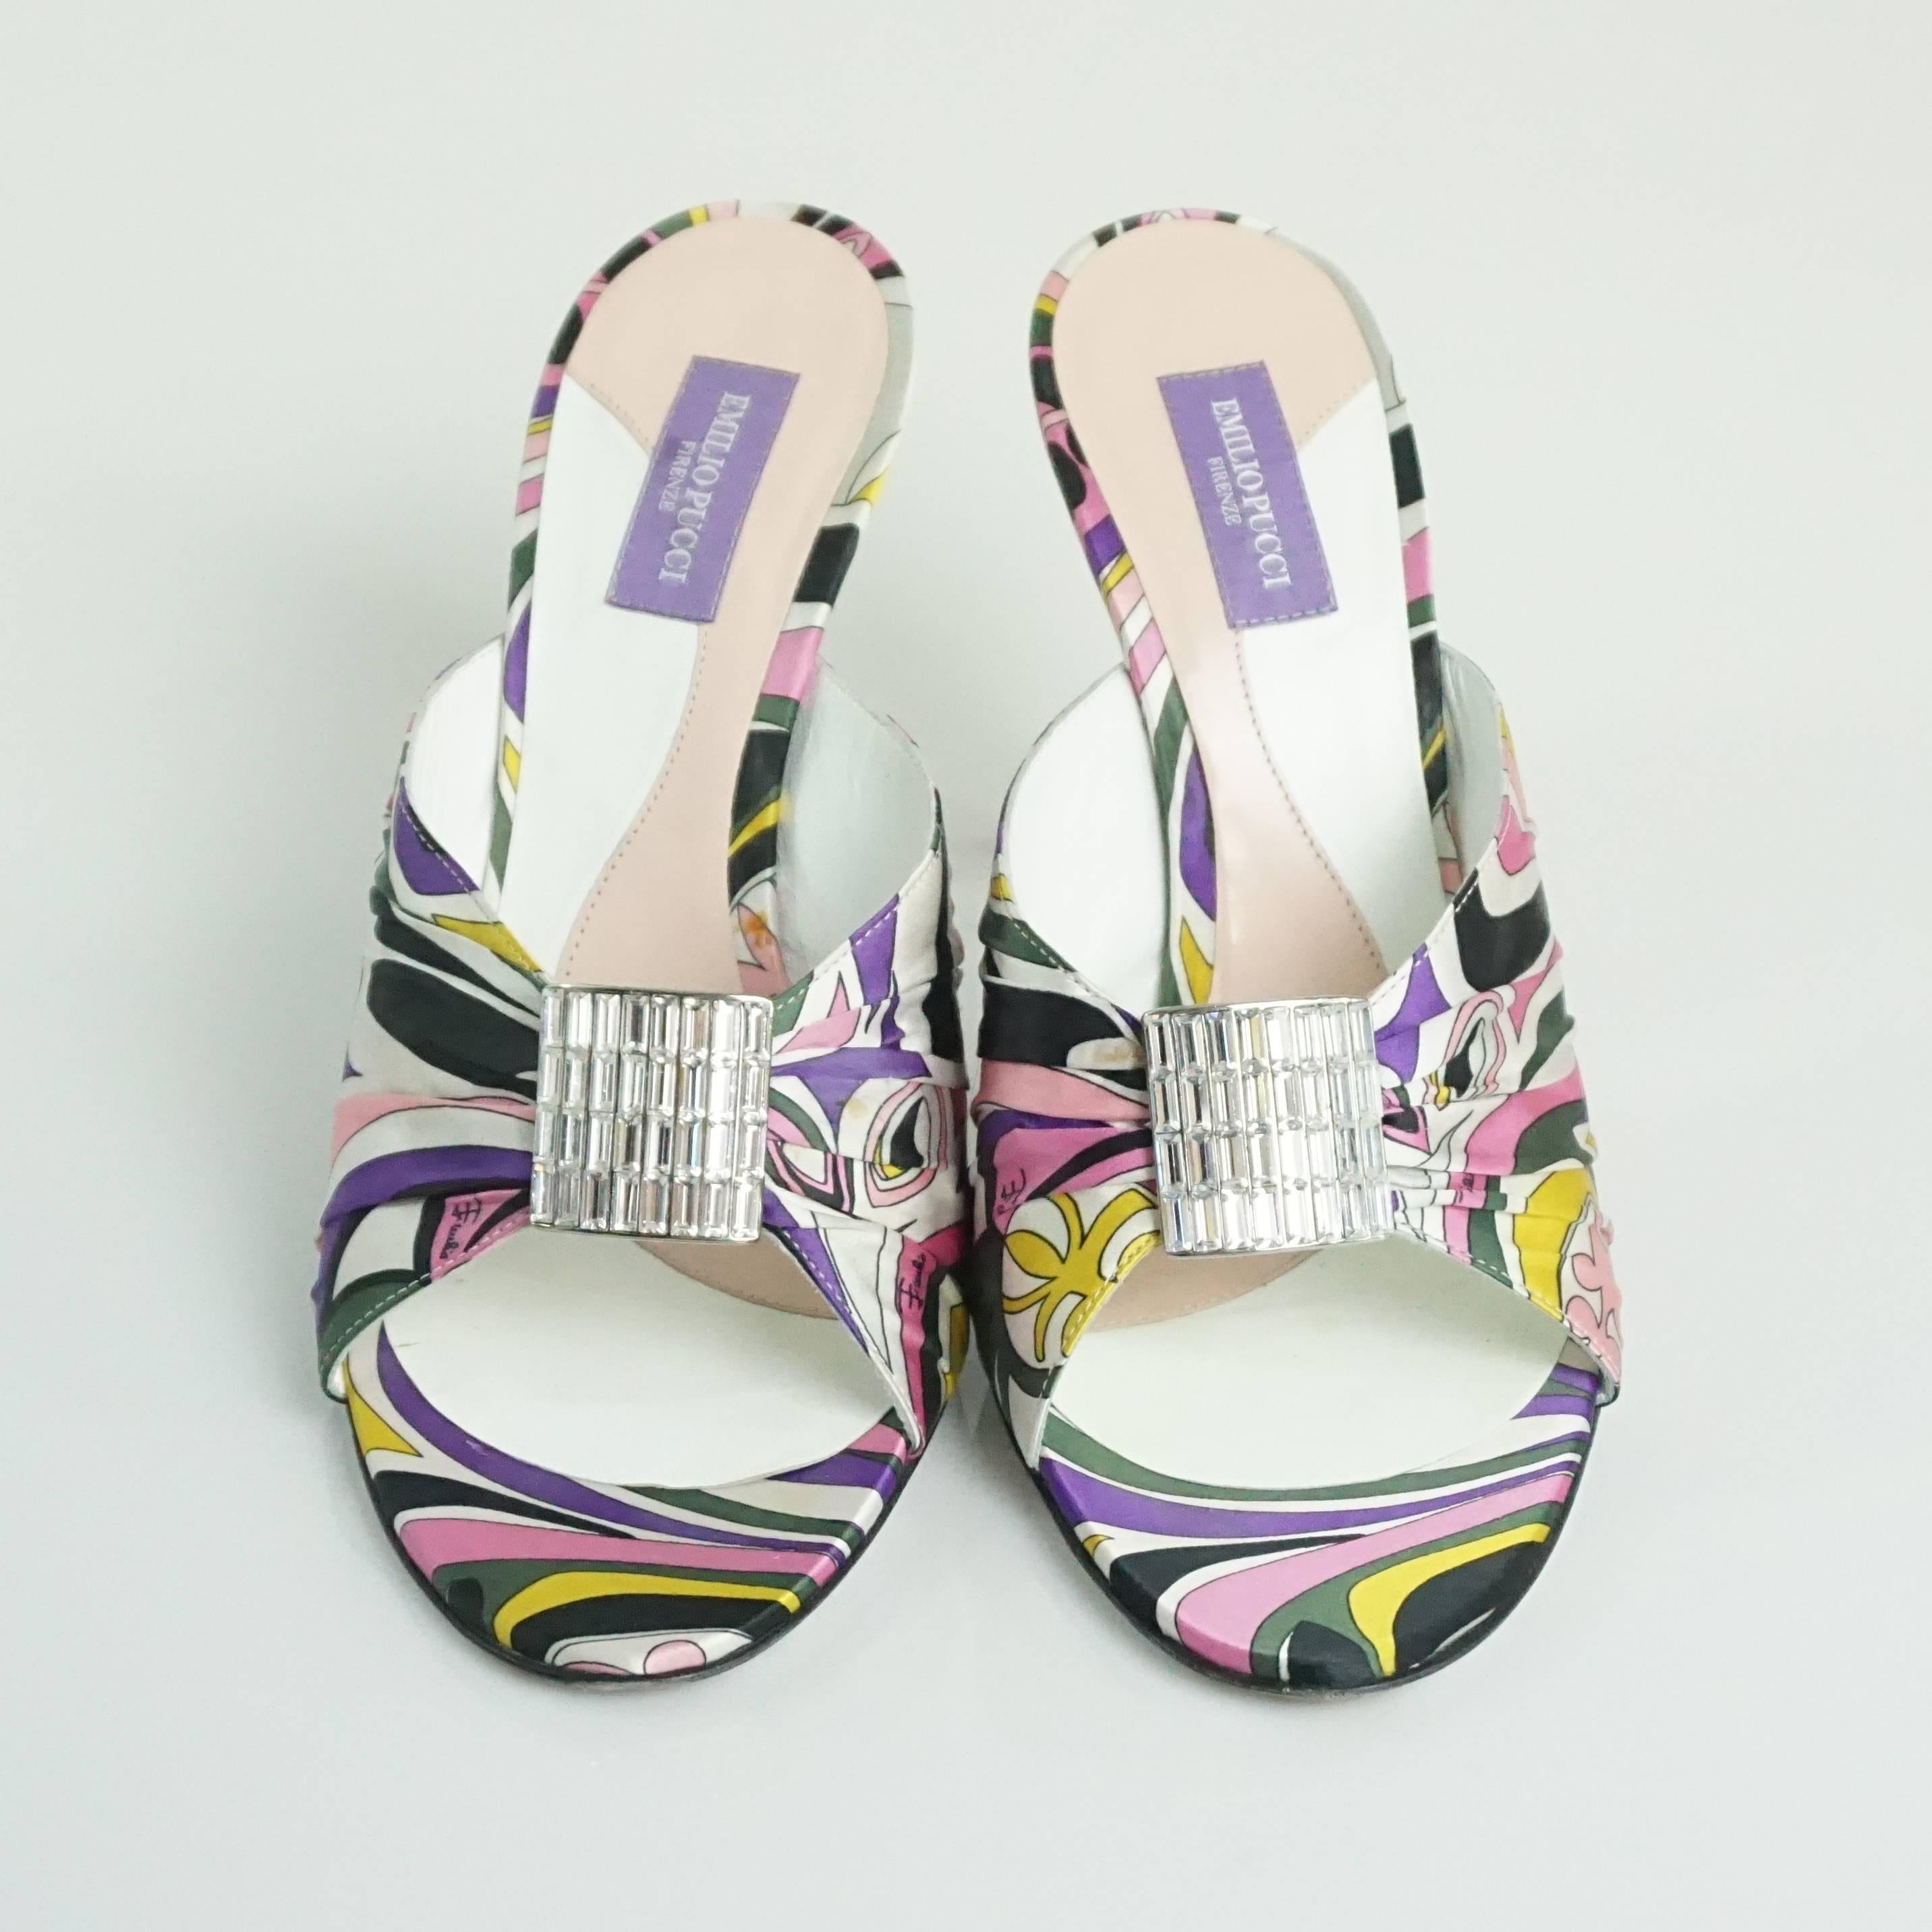 Gray Emilio Pucci Multi Silk Slide with leather heel and rhinestone front detail-37